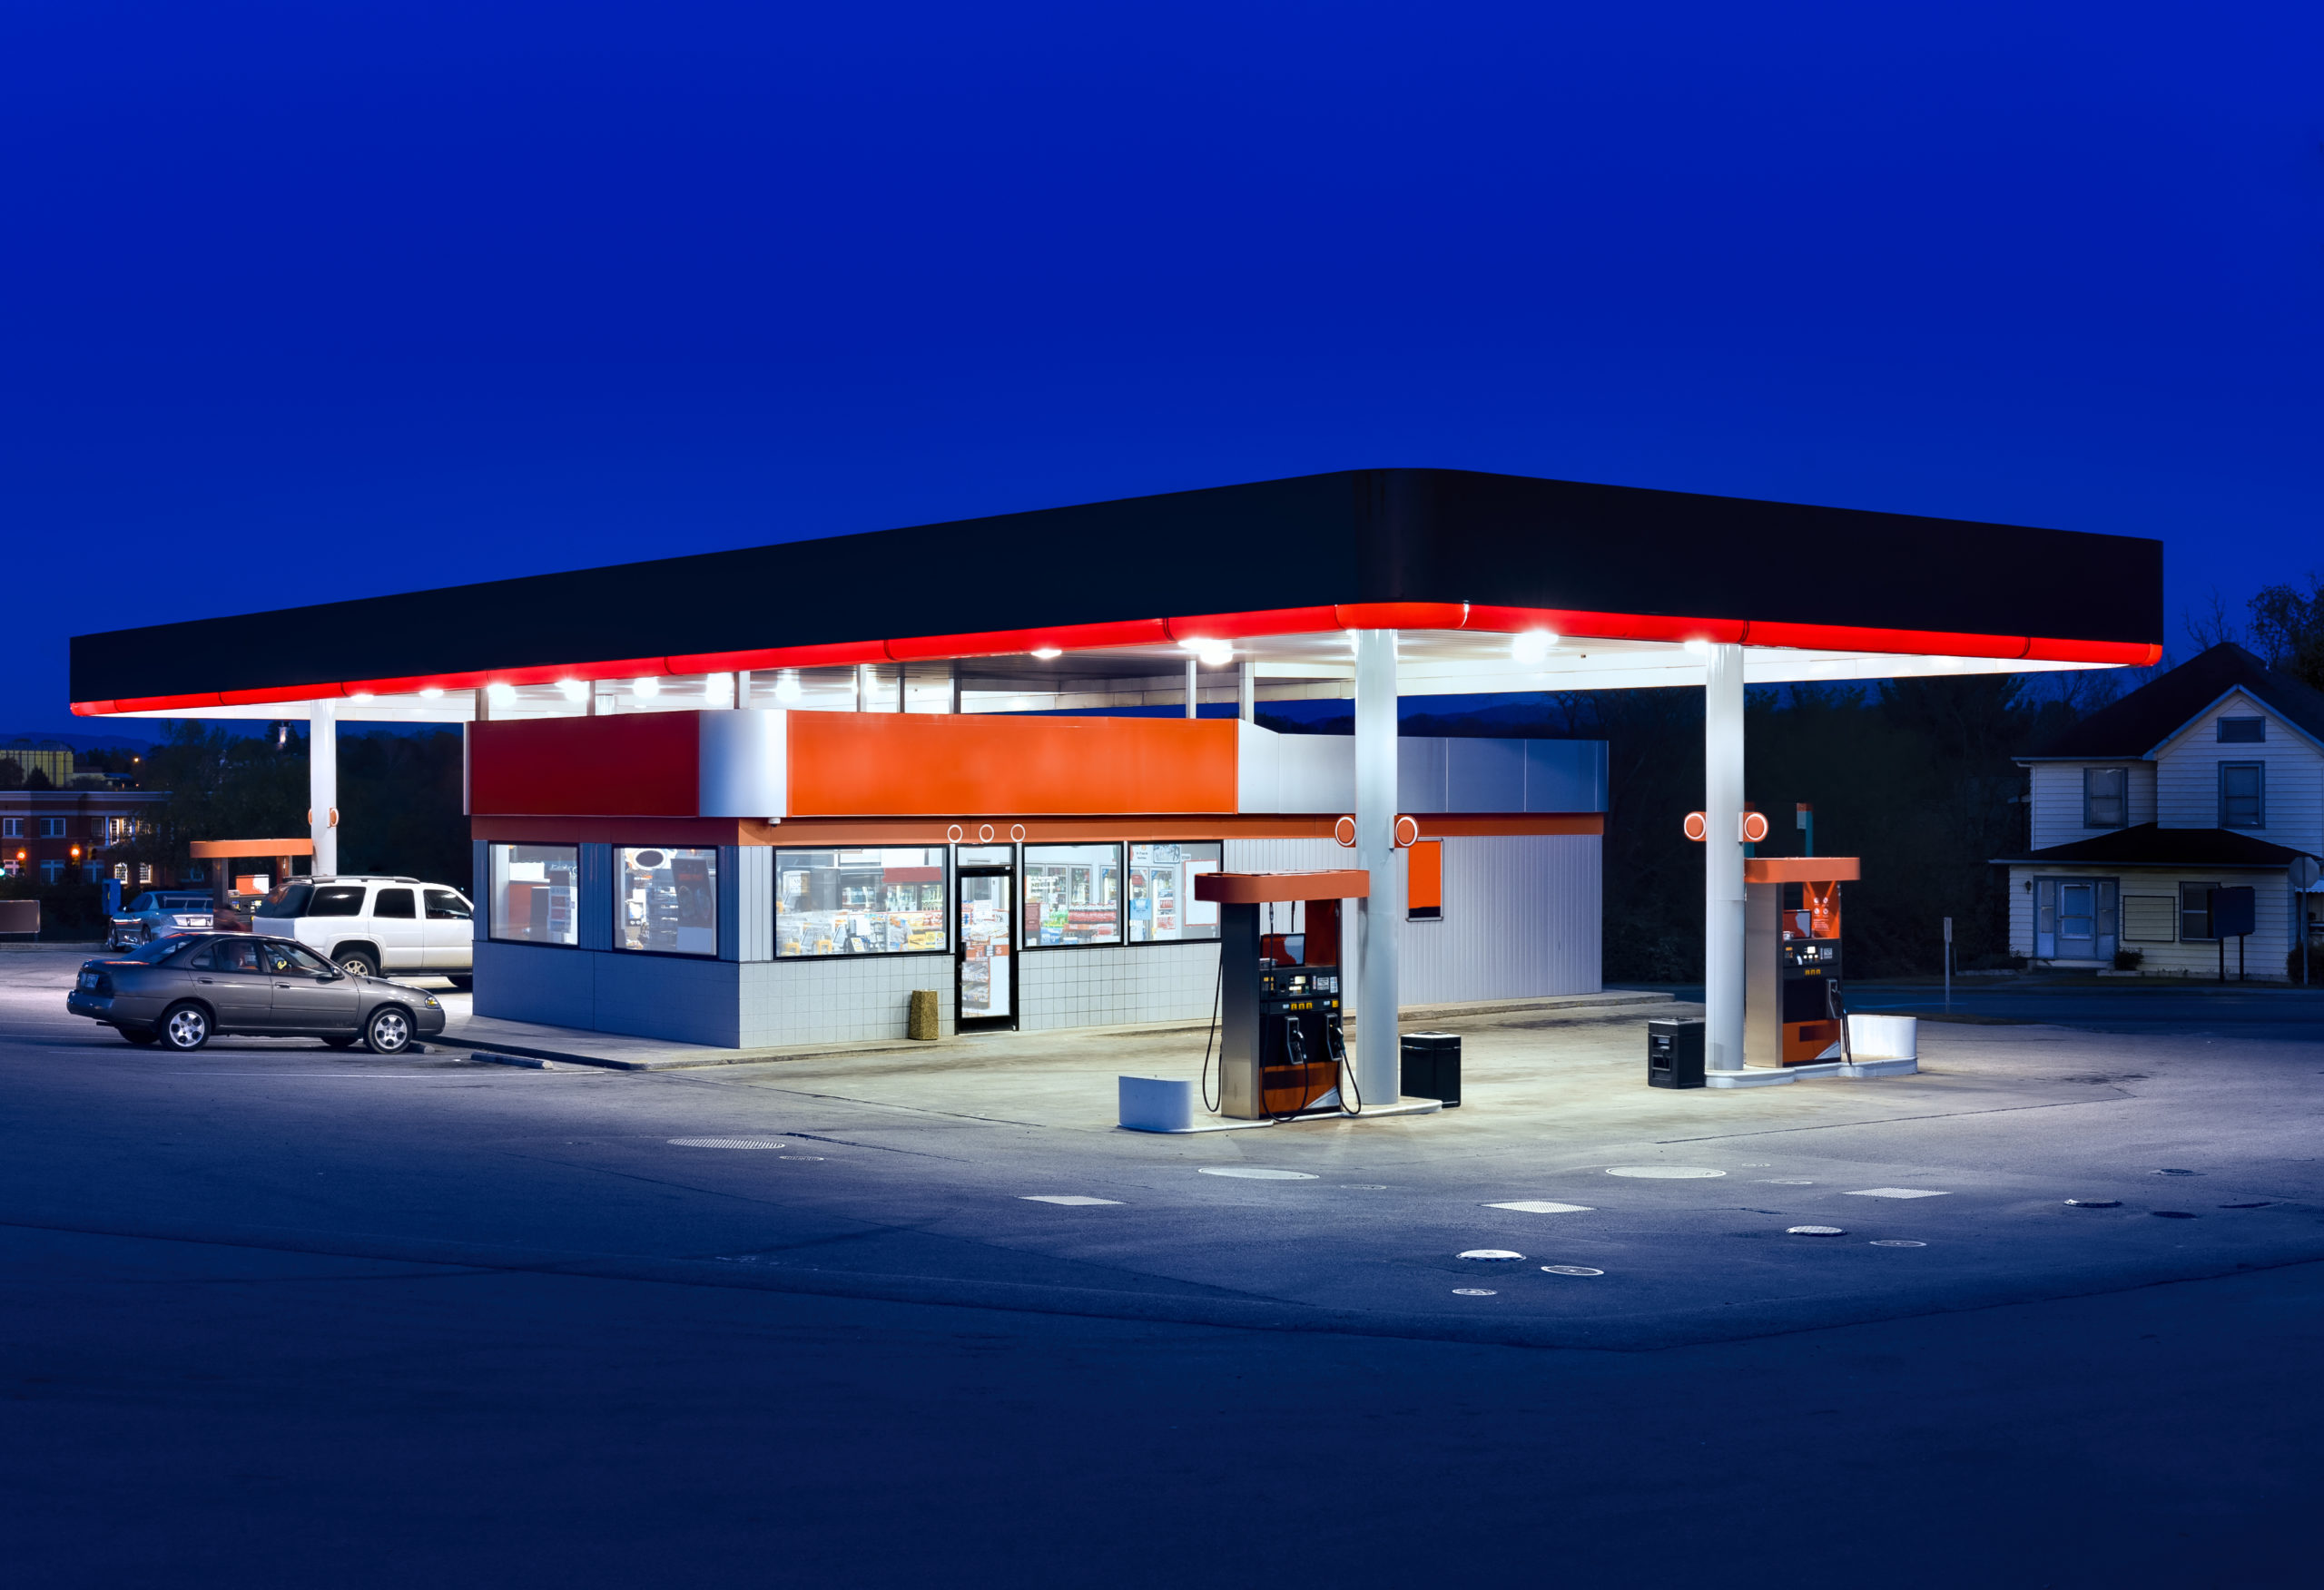 Generic gasoline station and convenience store at dusk.